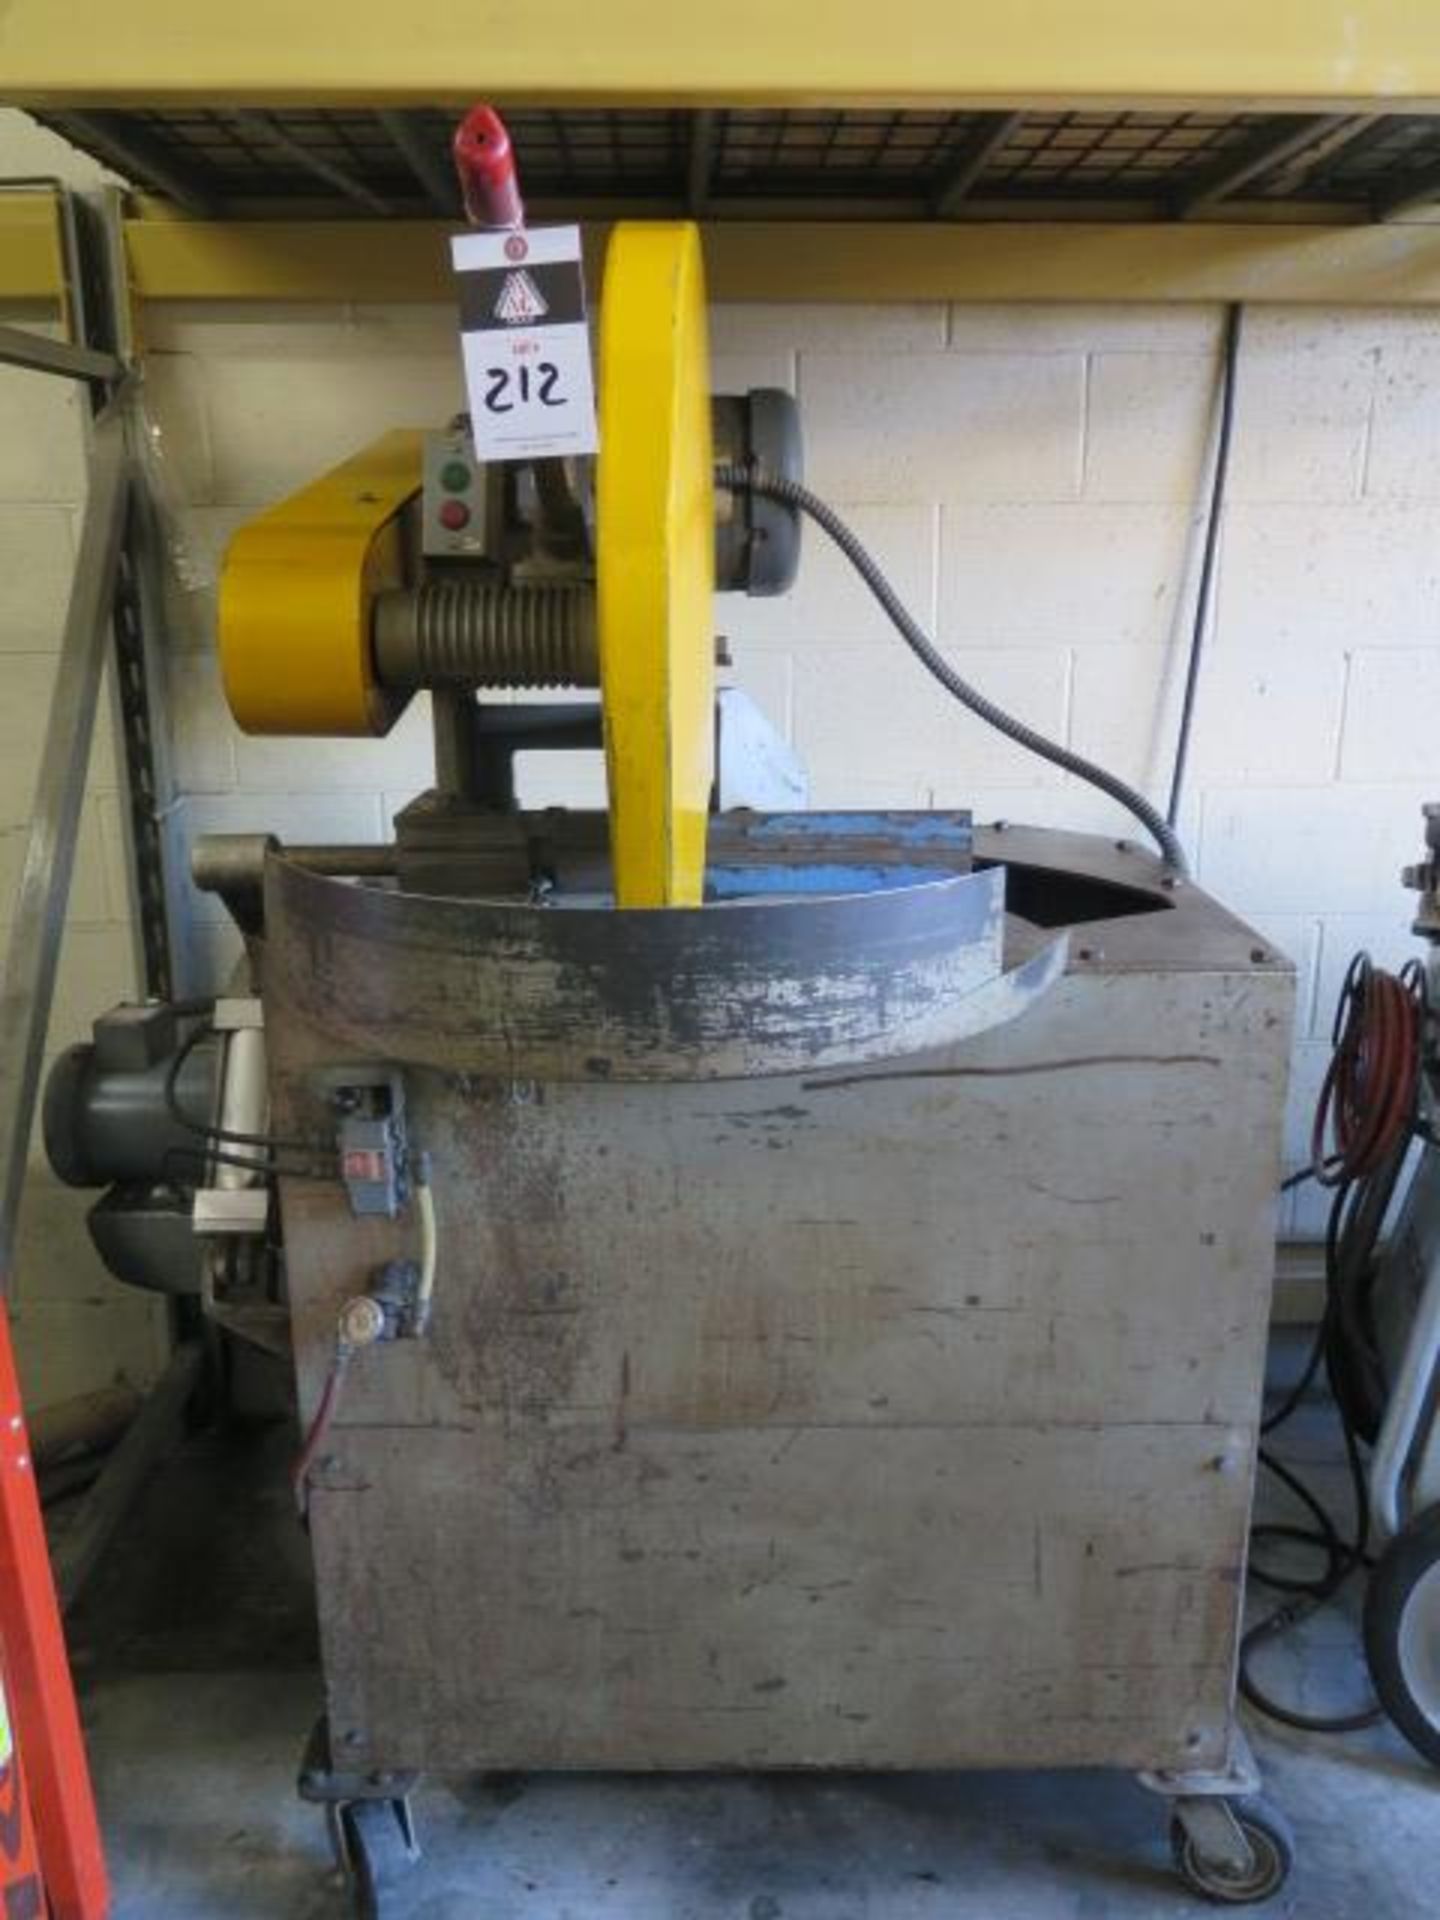 Everett mdl. 20AA22 20" Abrasive Miter Cutoff Saw s/n 6828-2 w/ Pneumatic Chain Clamping (SOLD AS-IS